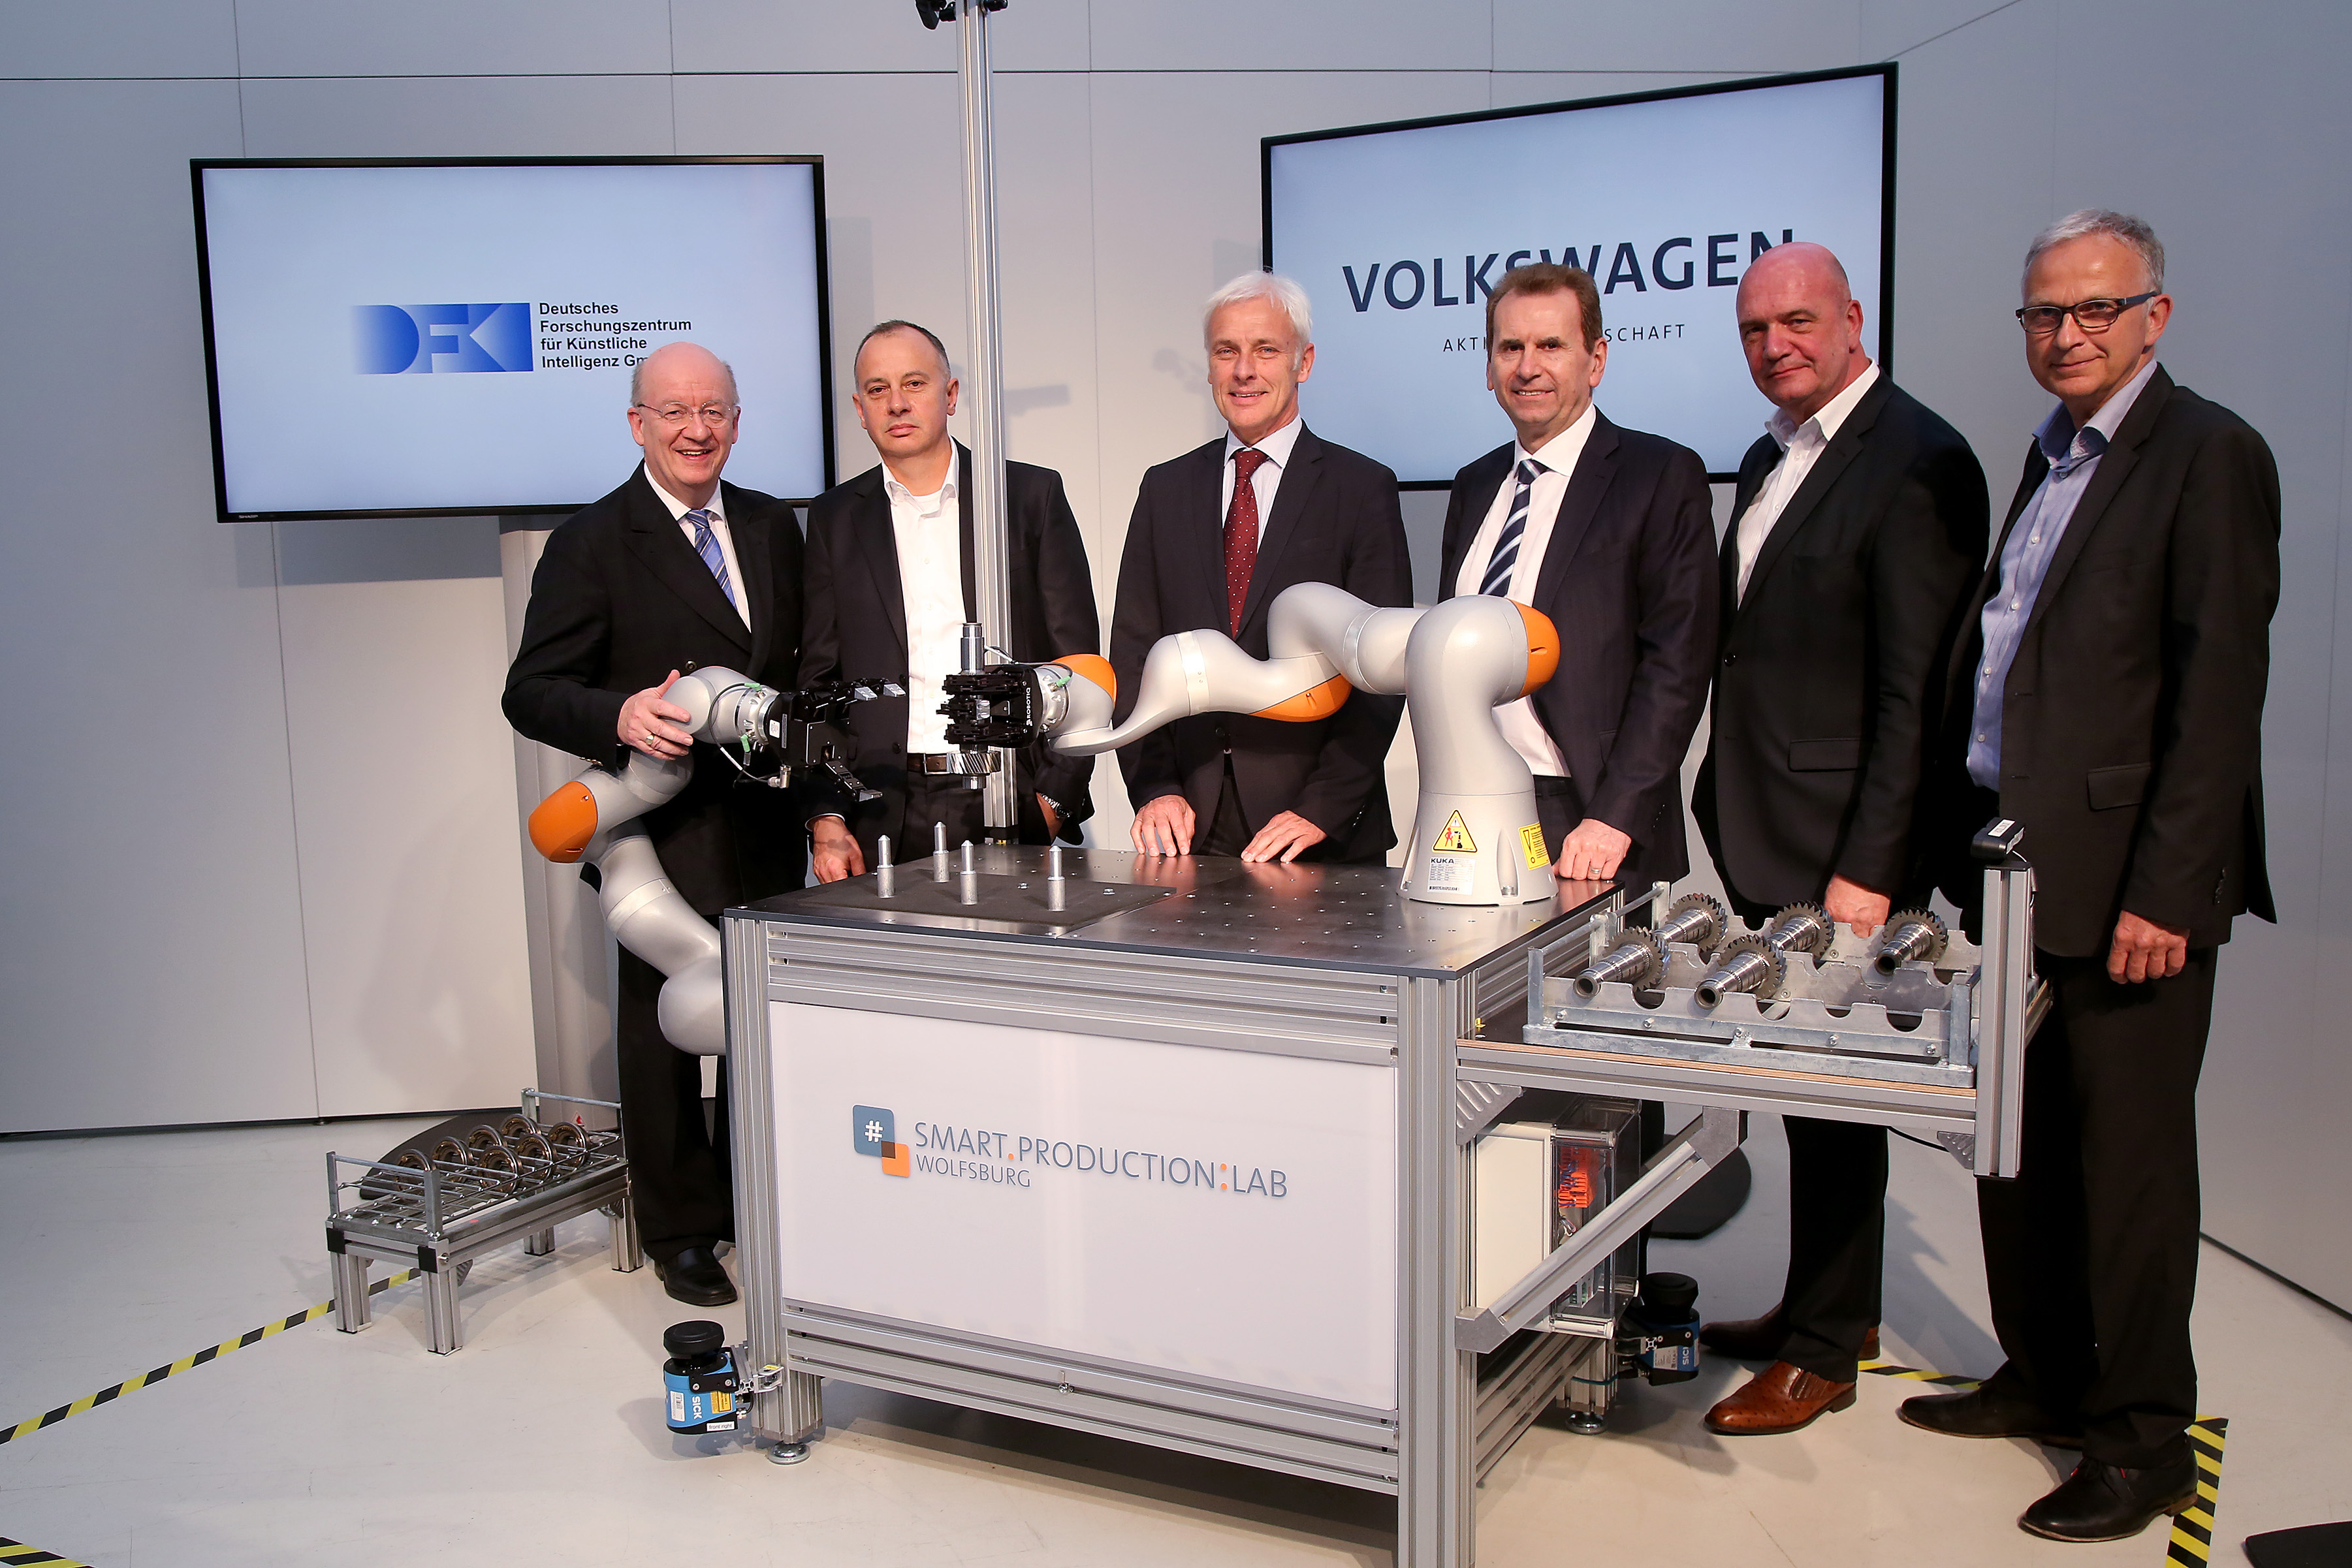 Prof. Wolfgang Wahlster (CEO, DFKI), Dr. Martin Hofmann (CIO, Volkswagen Group), Matthias Müller (CEO, Volkswagen Group), Dr. Karlheinz Blessing (Board Member for Human Resources, Volkswagen Group), Bernd Osterloh (Chairman of the Group Works Council, Volkswagen Group), Prof. Jürgen Leohold (Head of Volkswagen Group Research). Photo: Volkswagen Group